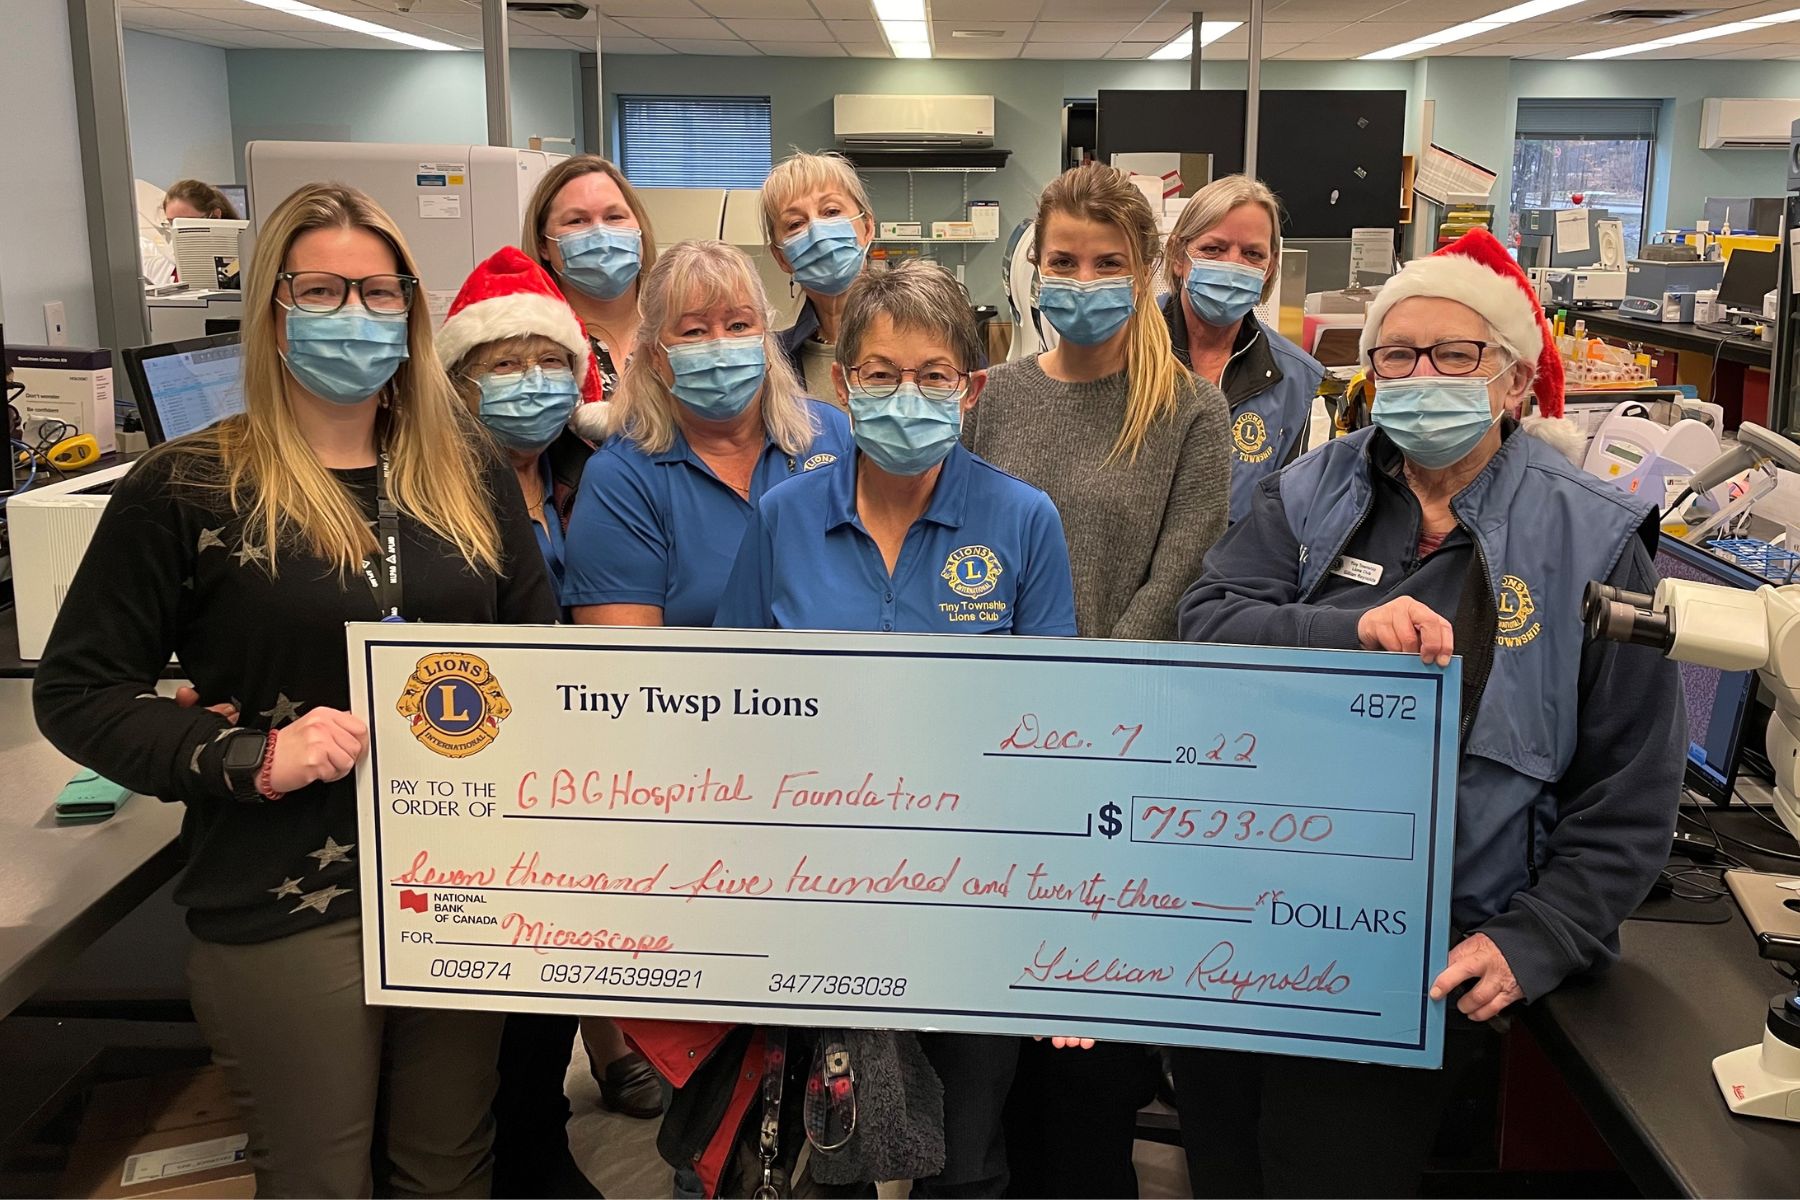 Nine people - many with Lions Club logos on their clothing hold a giant cheque for $7,523 for a microscope for the GBGH from the Tiny Township Lions club.